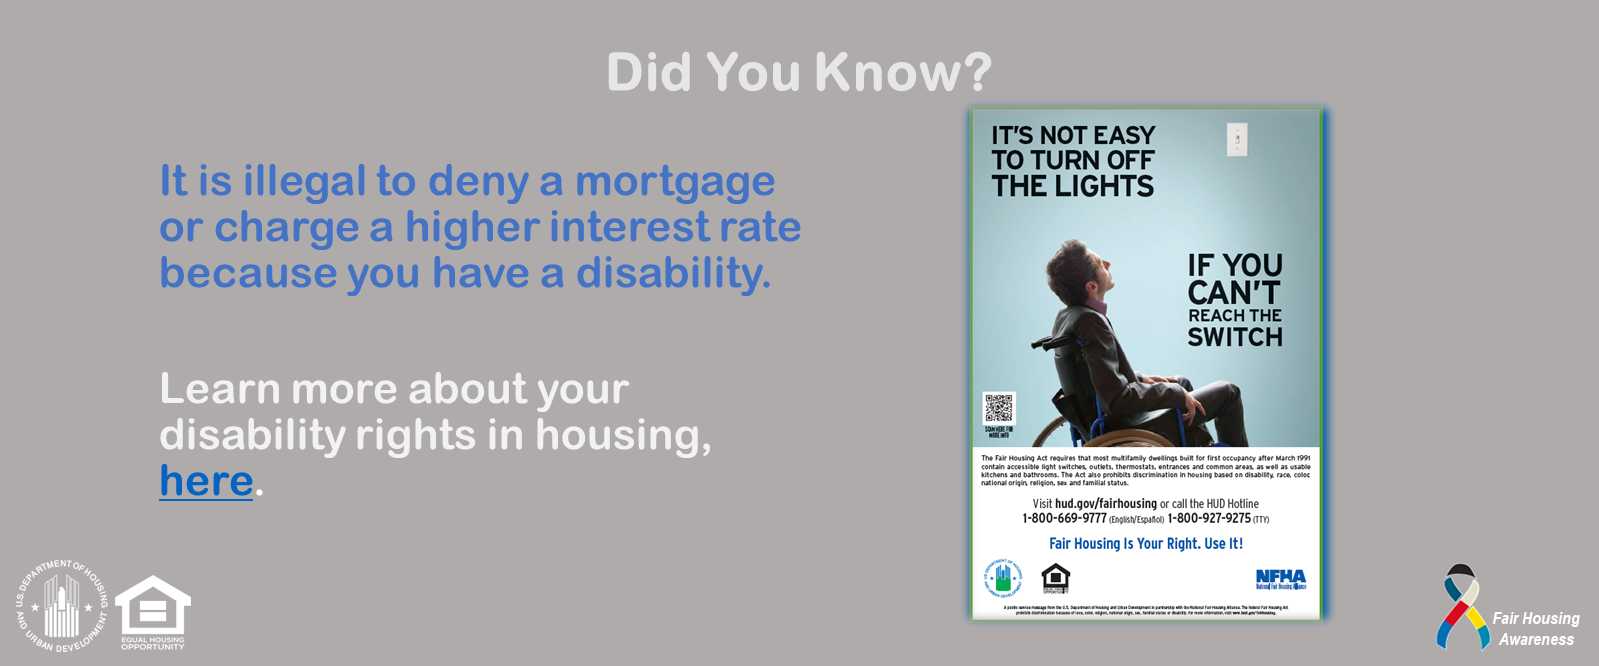 [It is illegal to deny a mortgage or charge a higher interest rate because you have a disability.]. HUD Photo